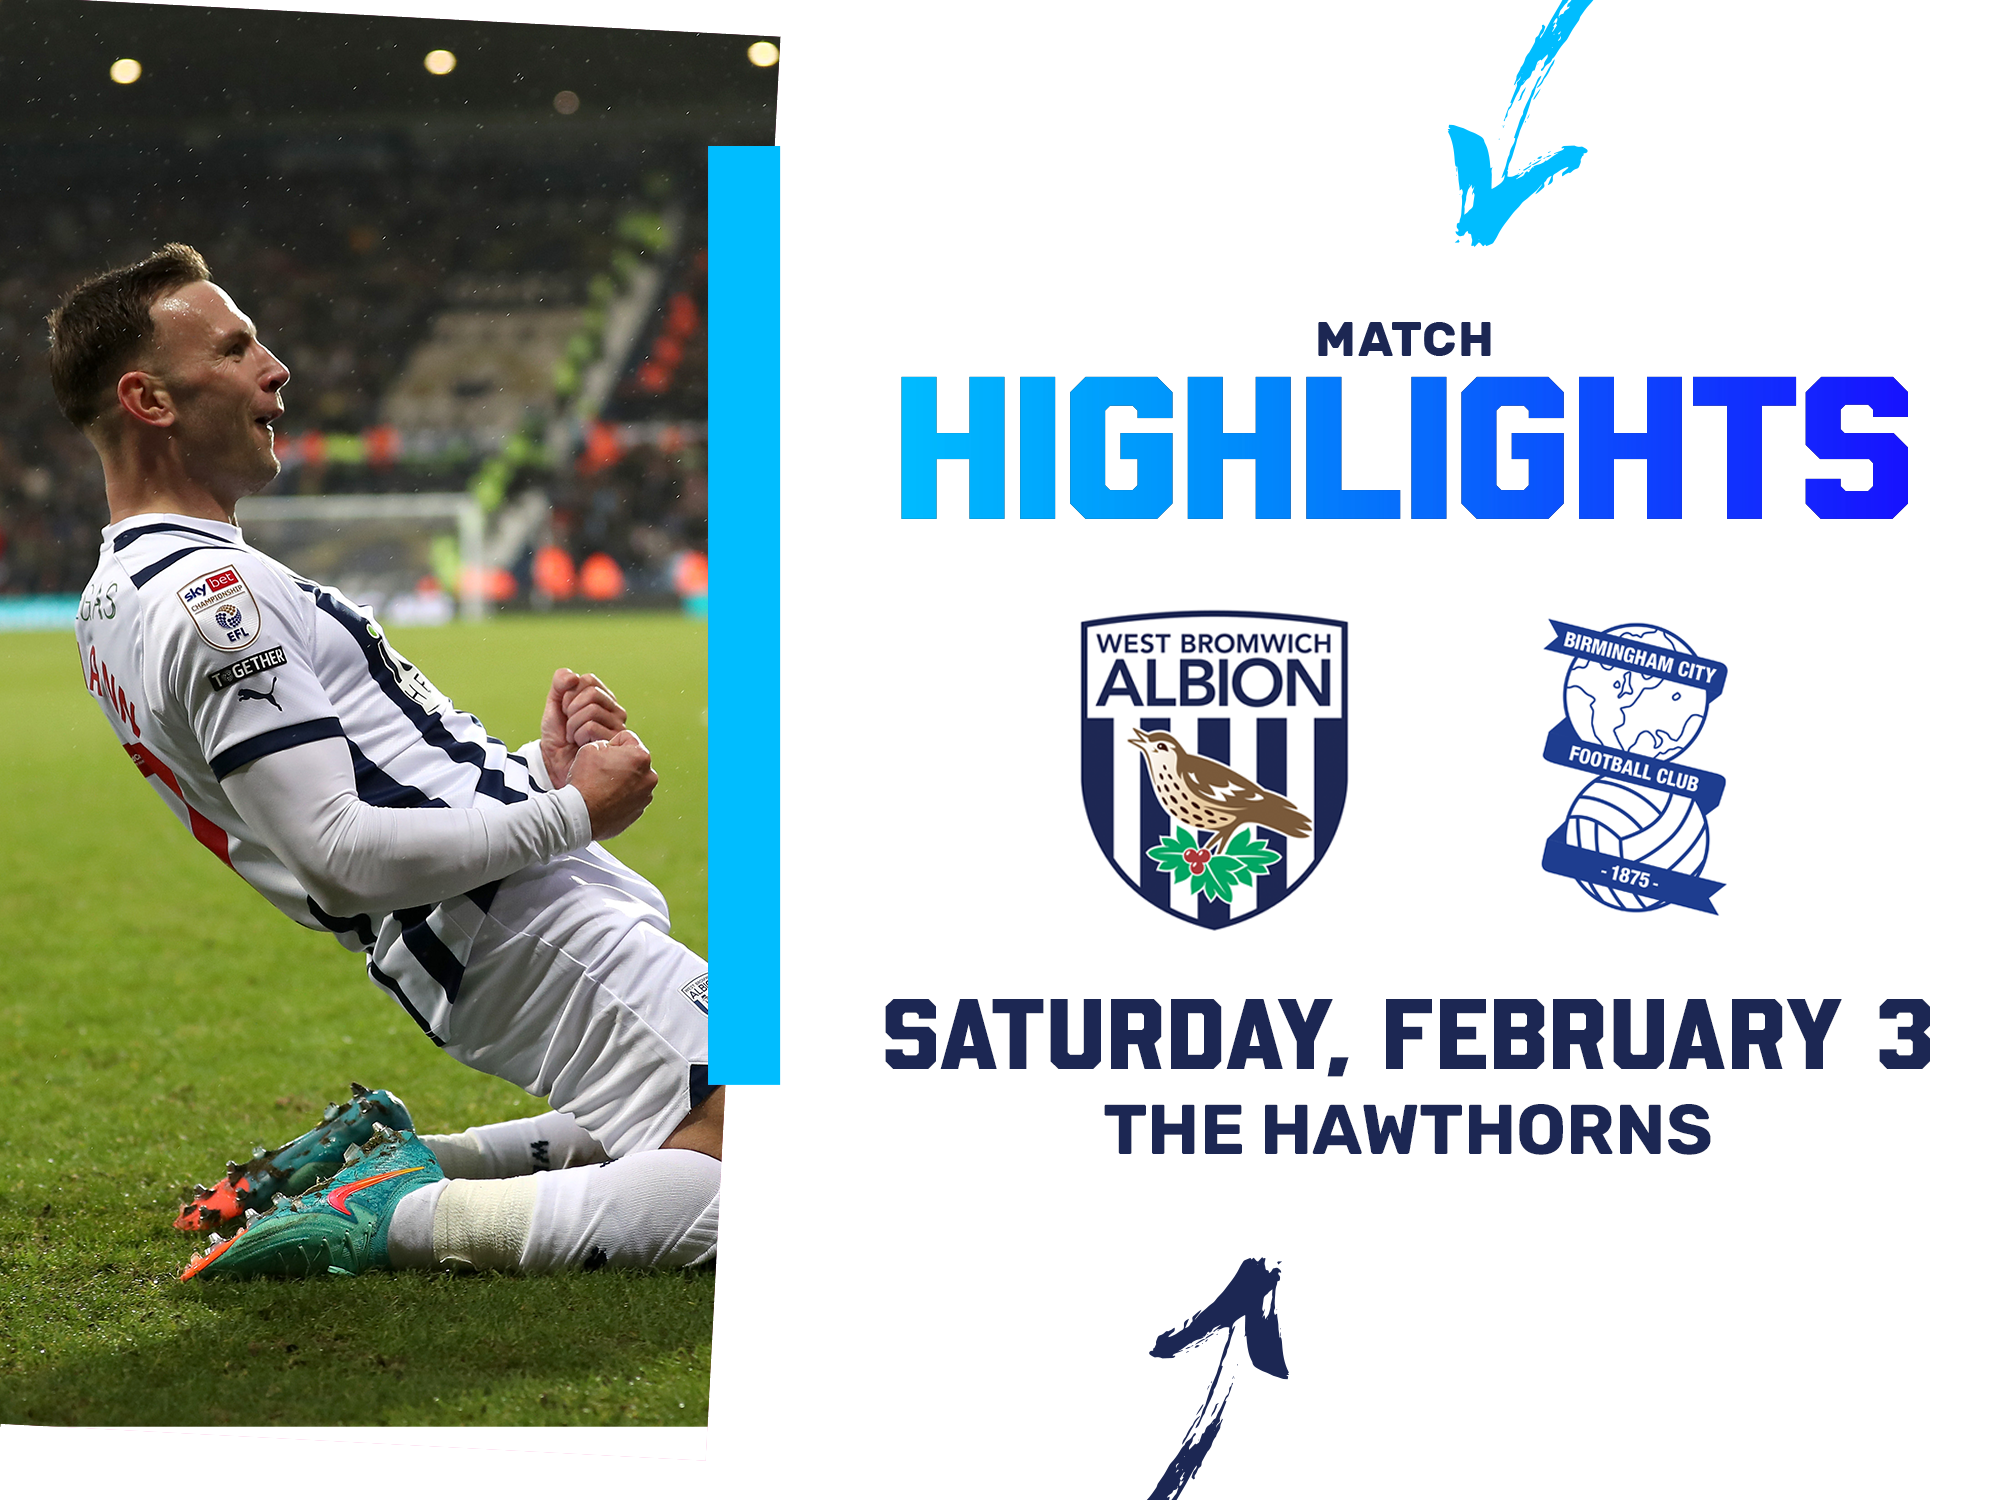 A photo match highlights graphic, with the club crests of Albion and Birmingham City, showing a picture of Andi Weimann celebrating his winning goal